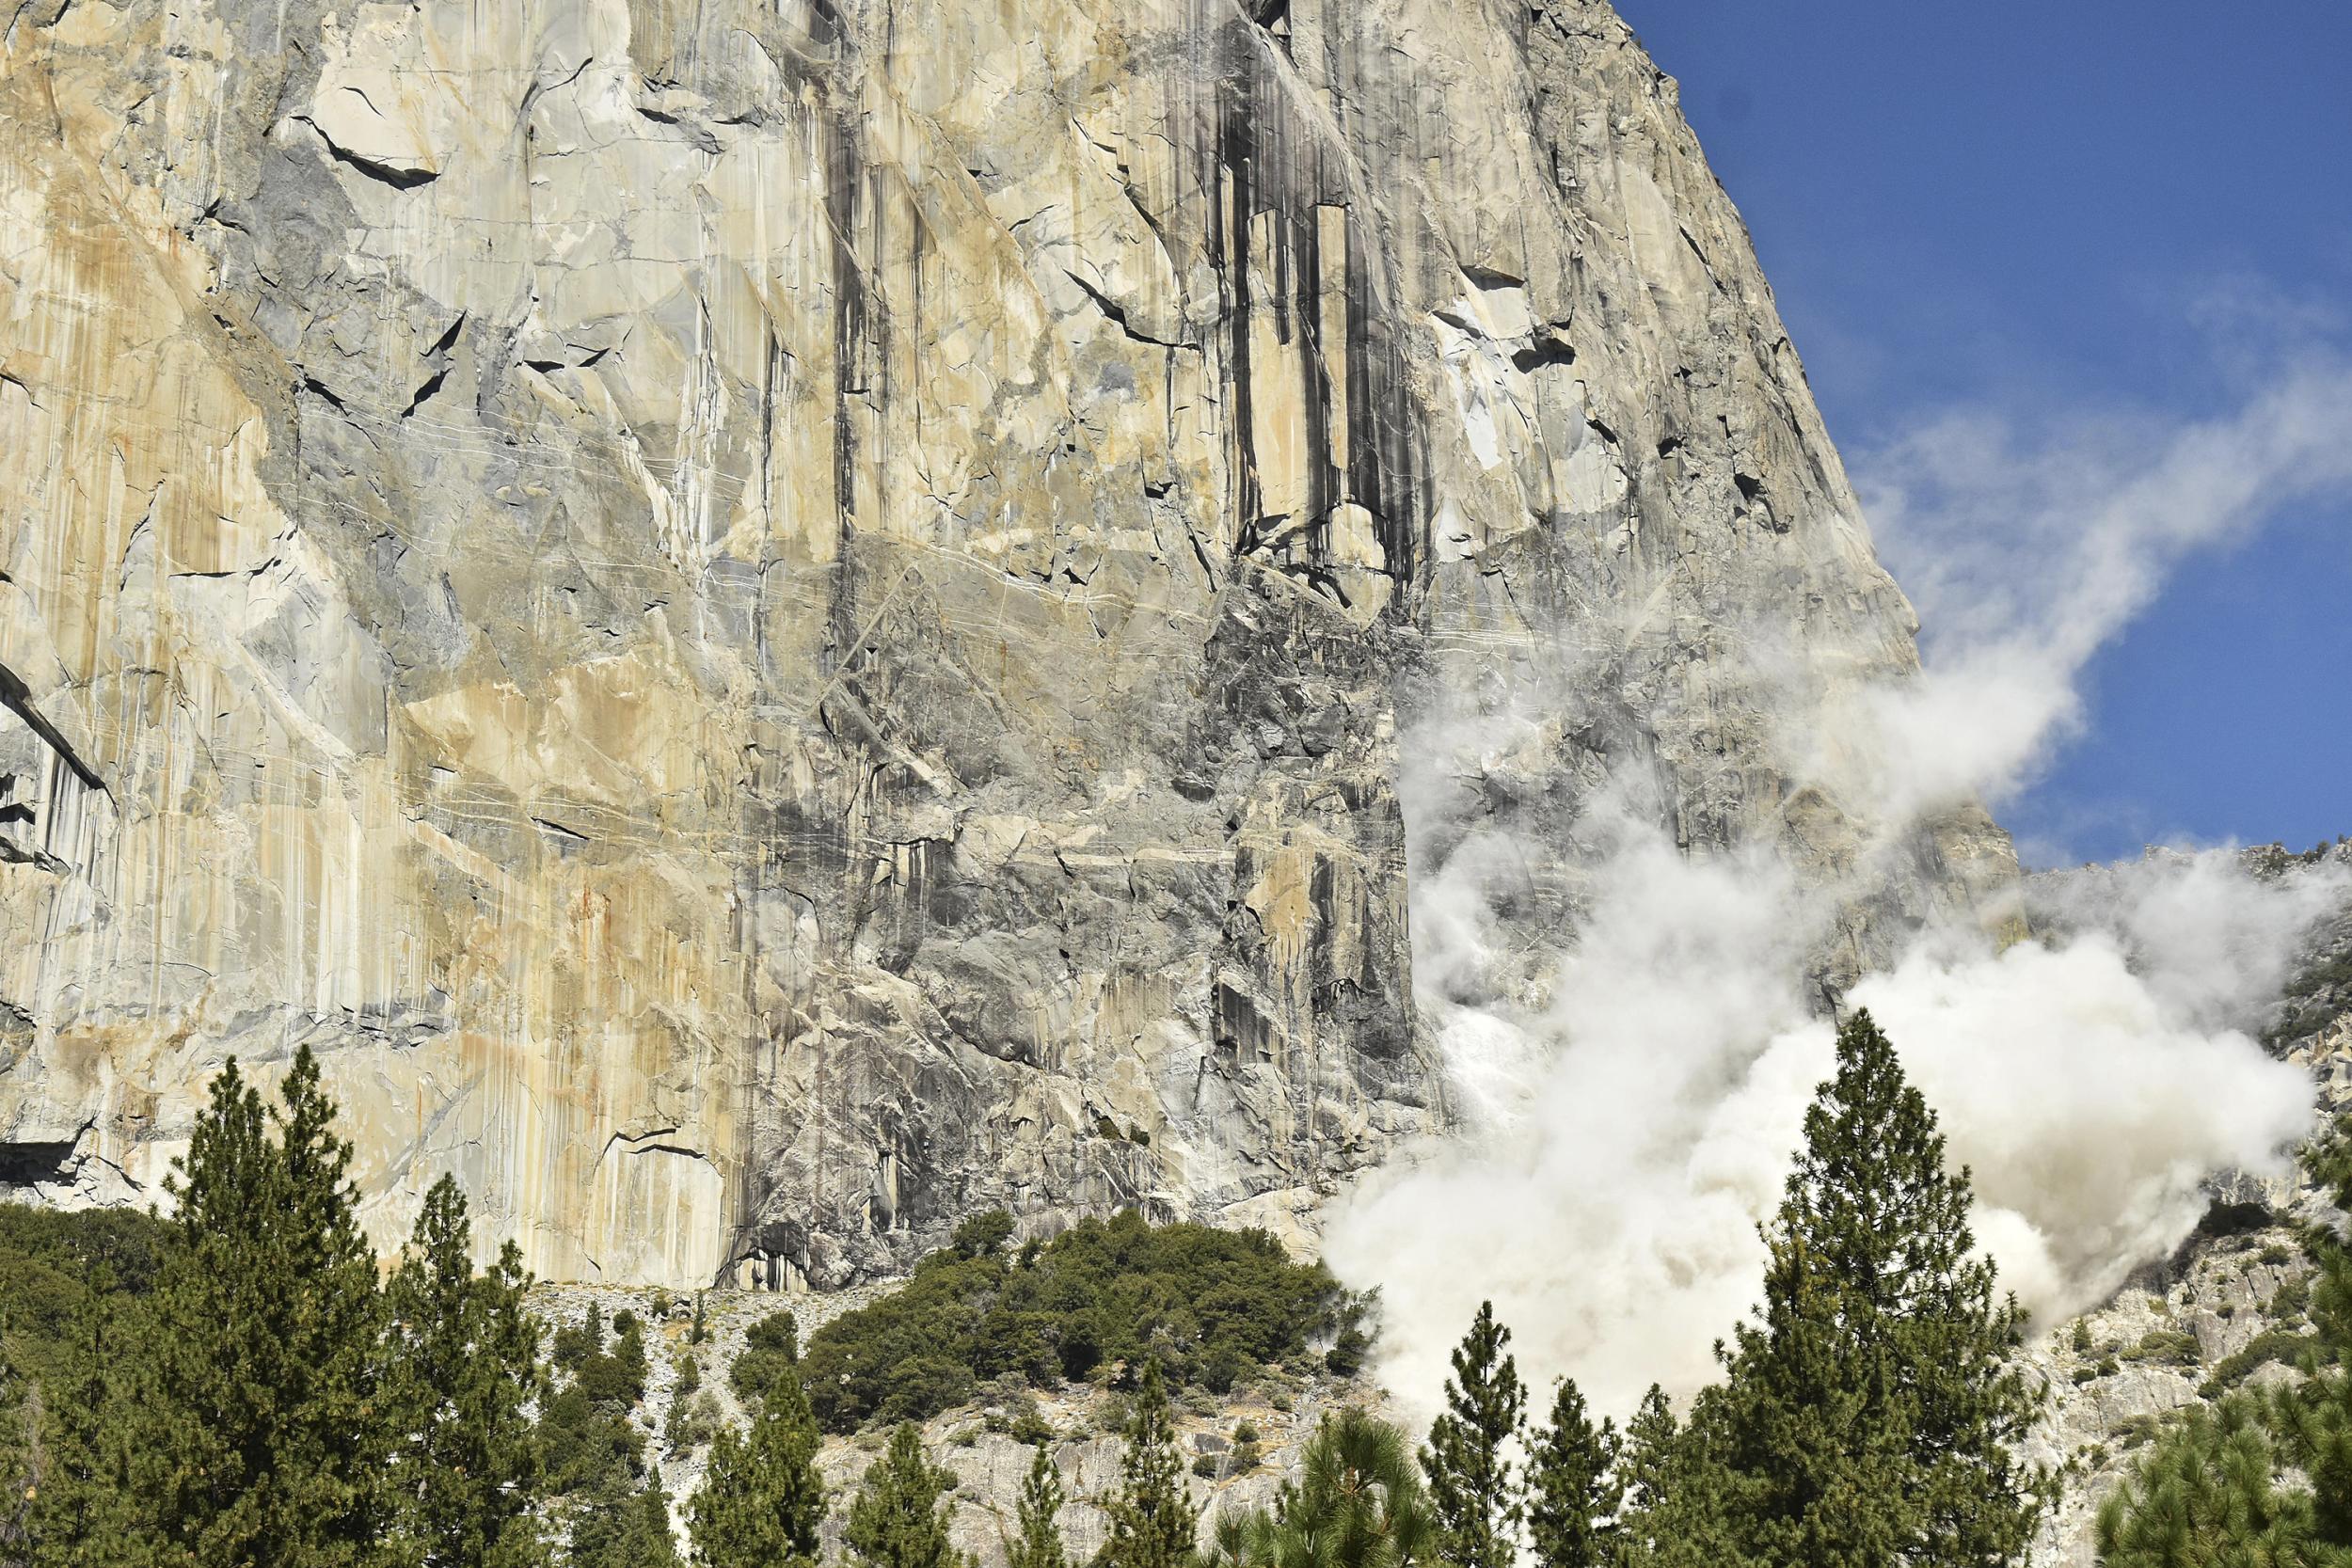 A cloud of dust is seen on El Capitan after the rock fall that killed Andrew Foster